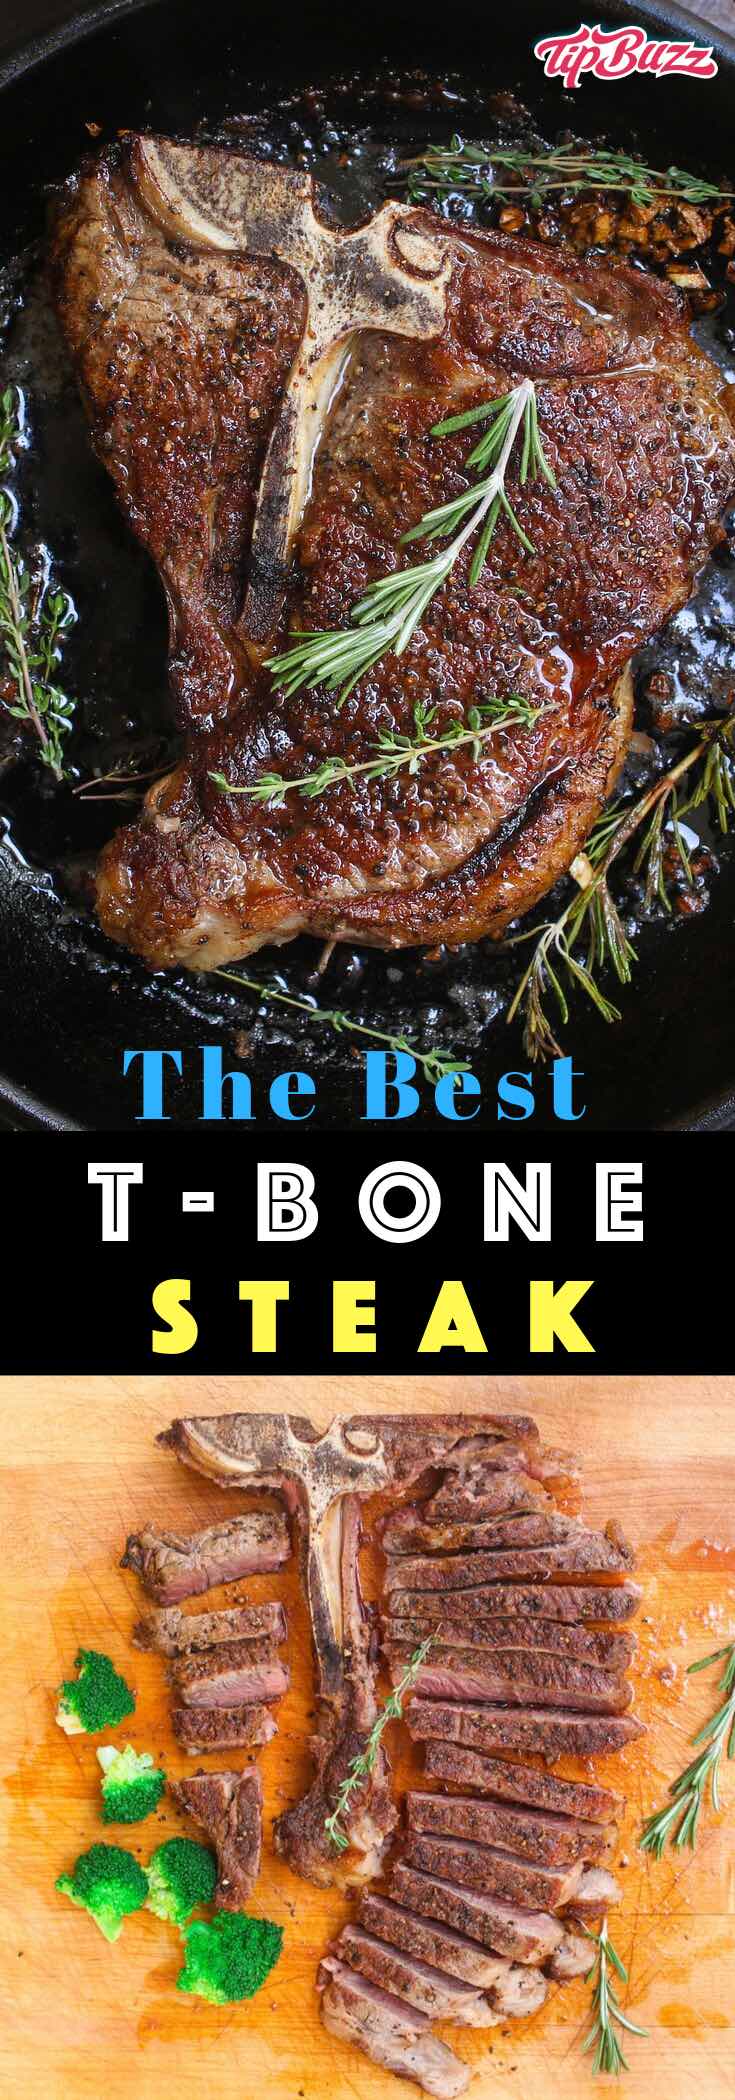 T-bone Steak seared to caramelized perfection